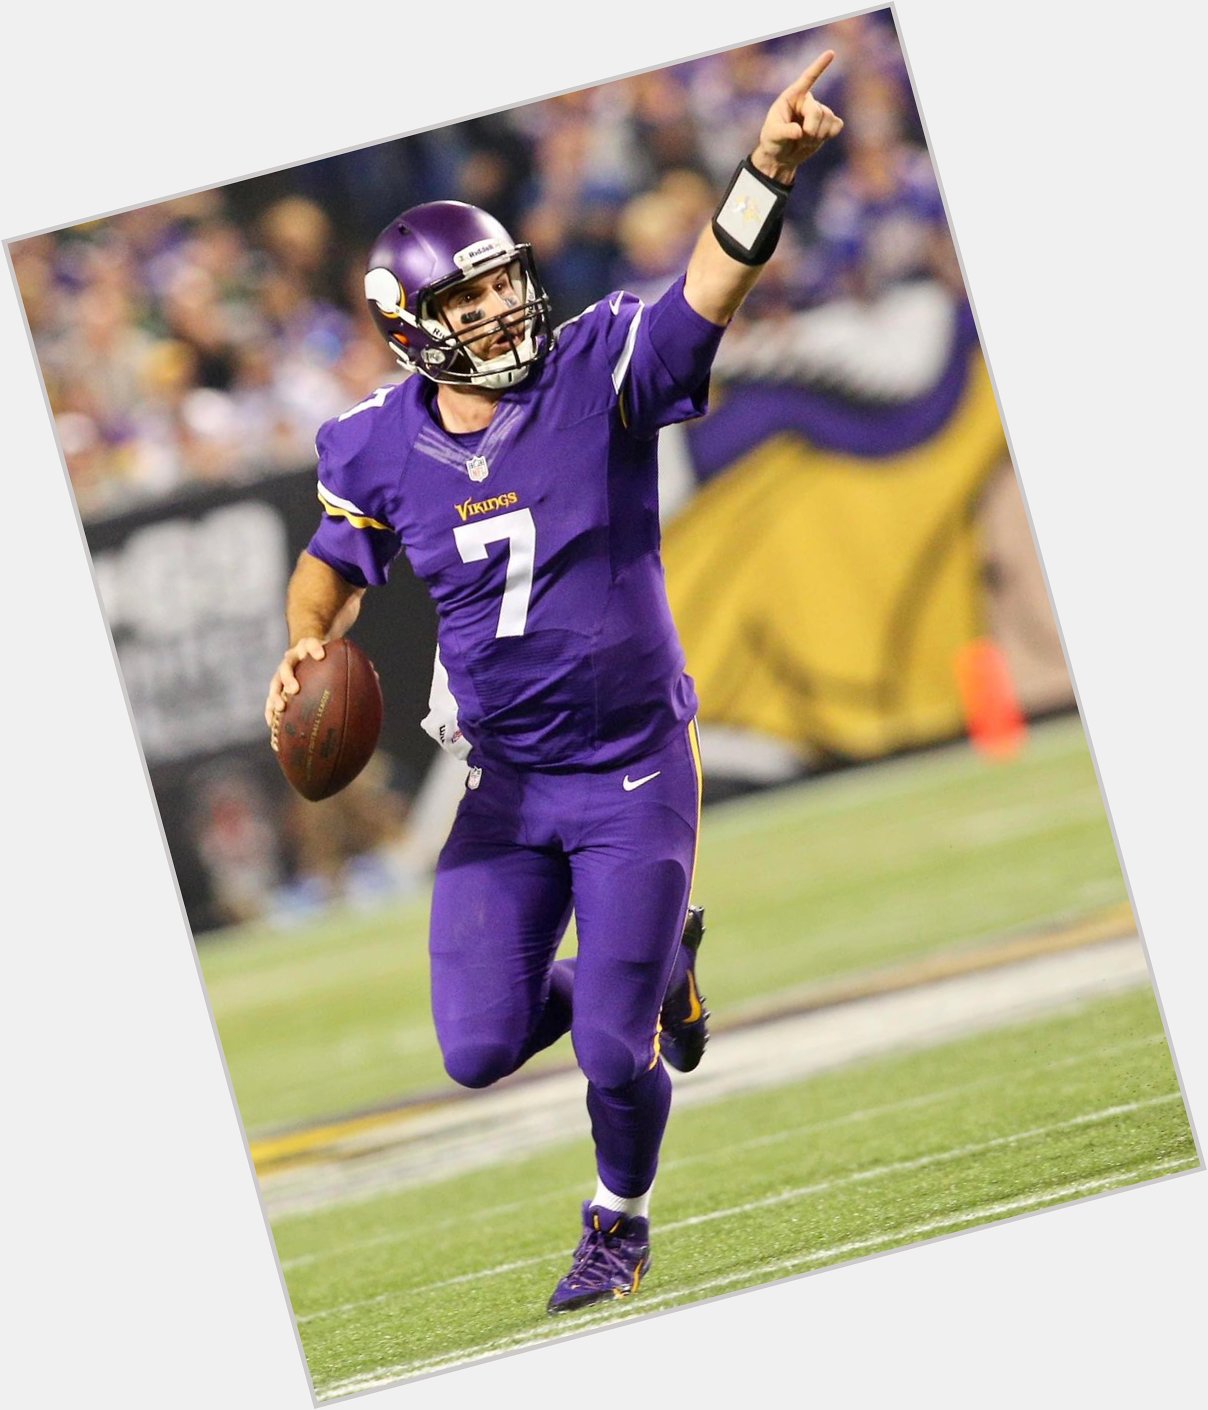 Guess who eligible to play in the today! Happy Birthday to Vikings legend Christian Ponder! 